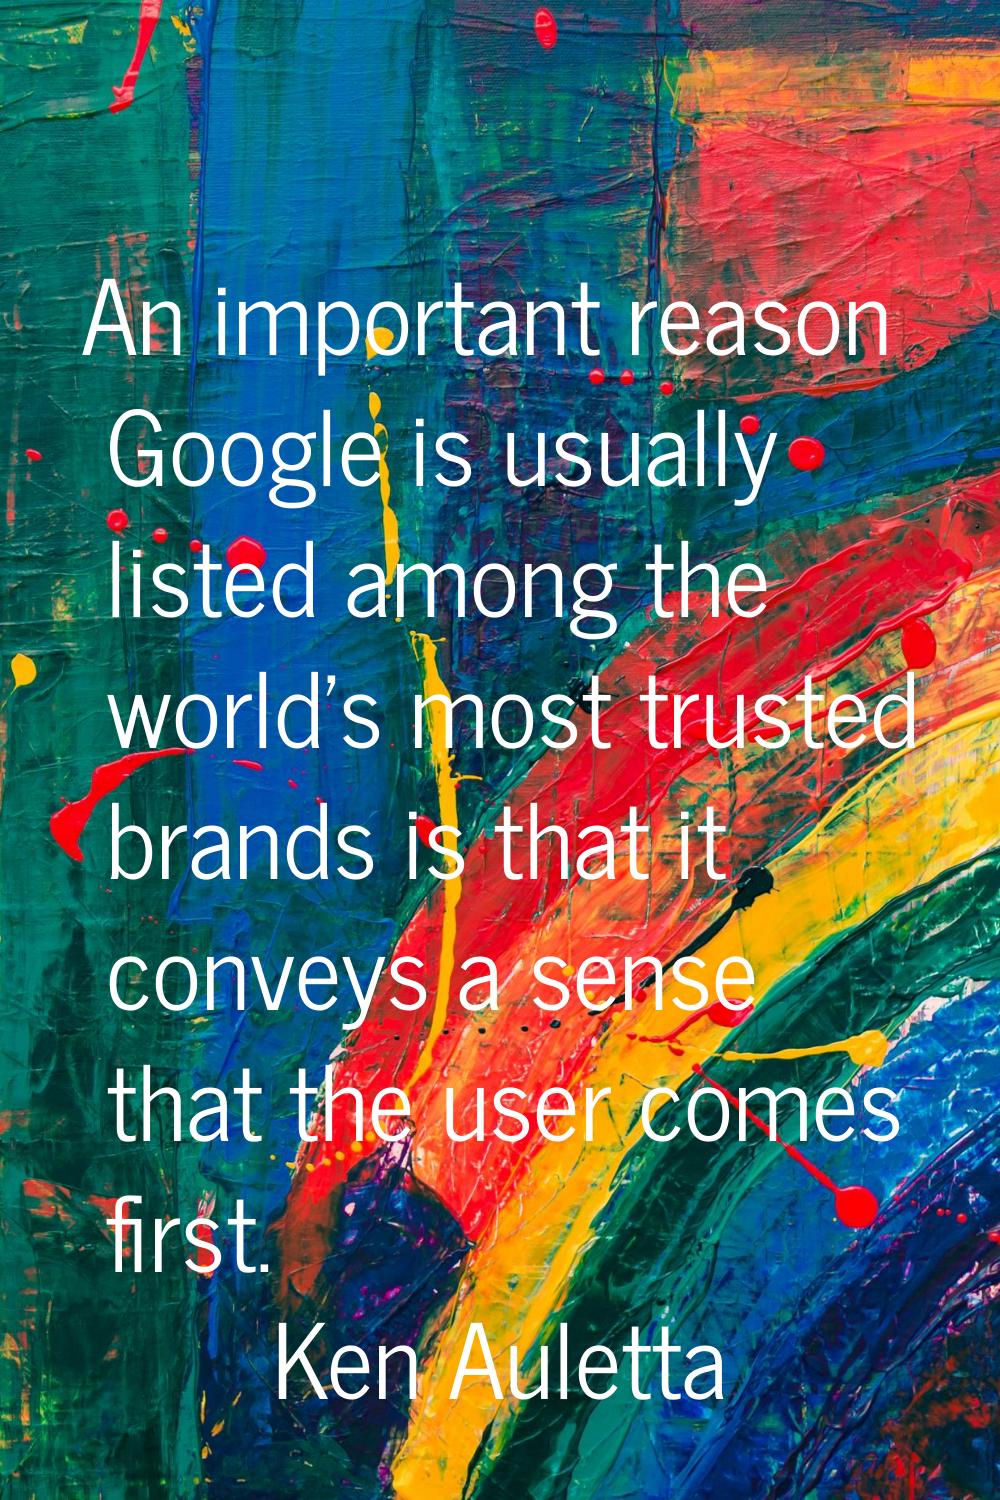 An important reason Google is usually listed among the world's most trusted brands is that it conve